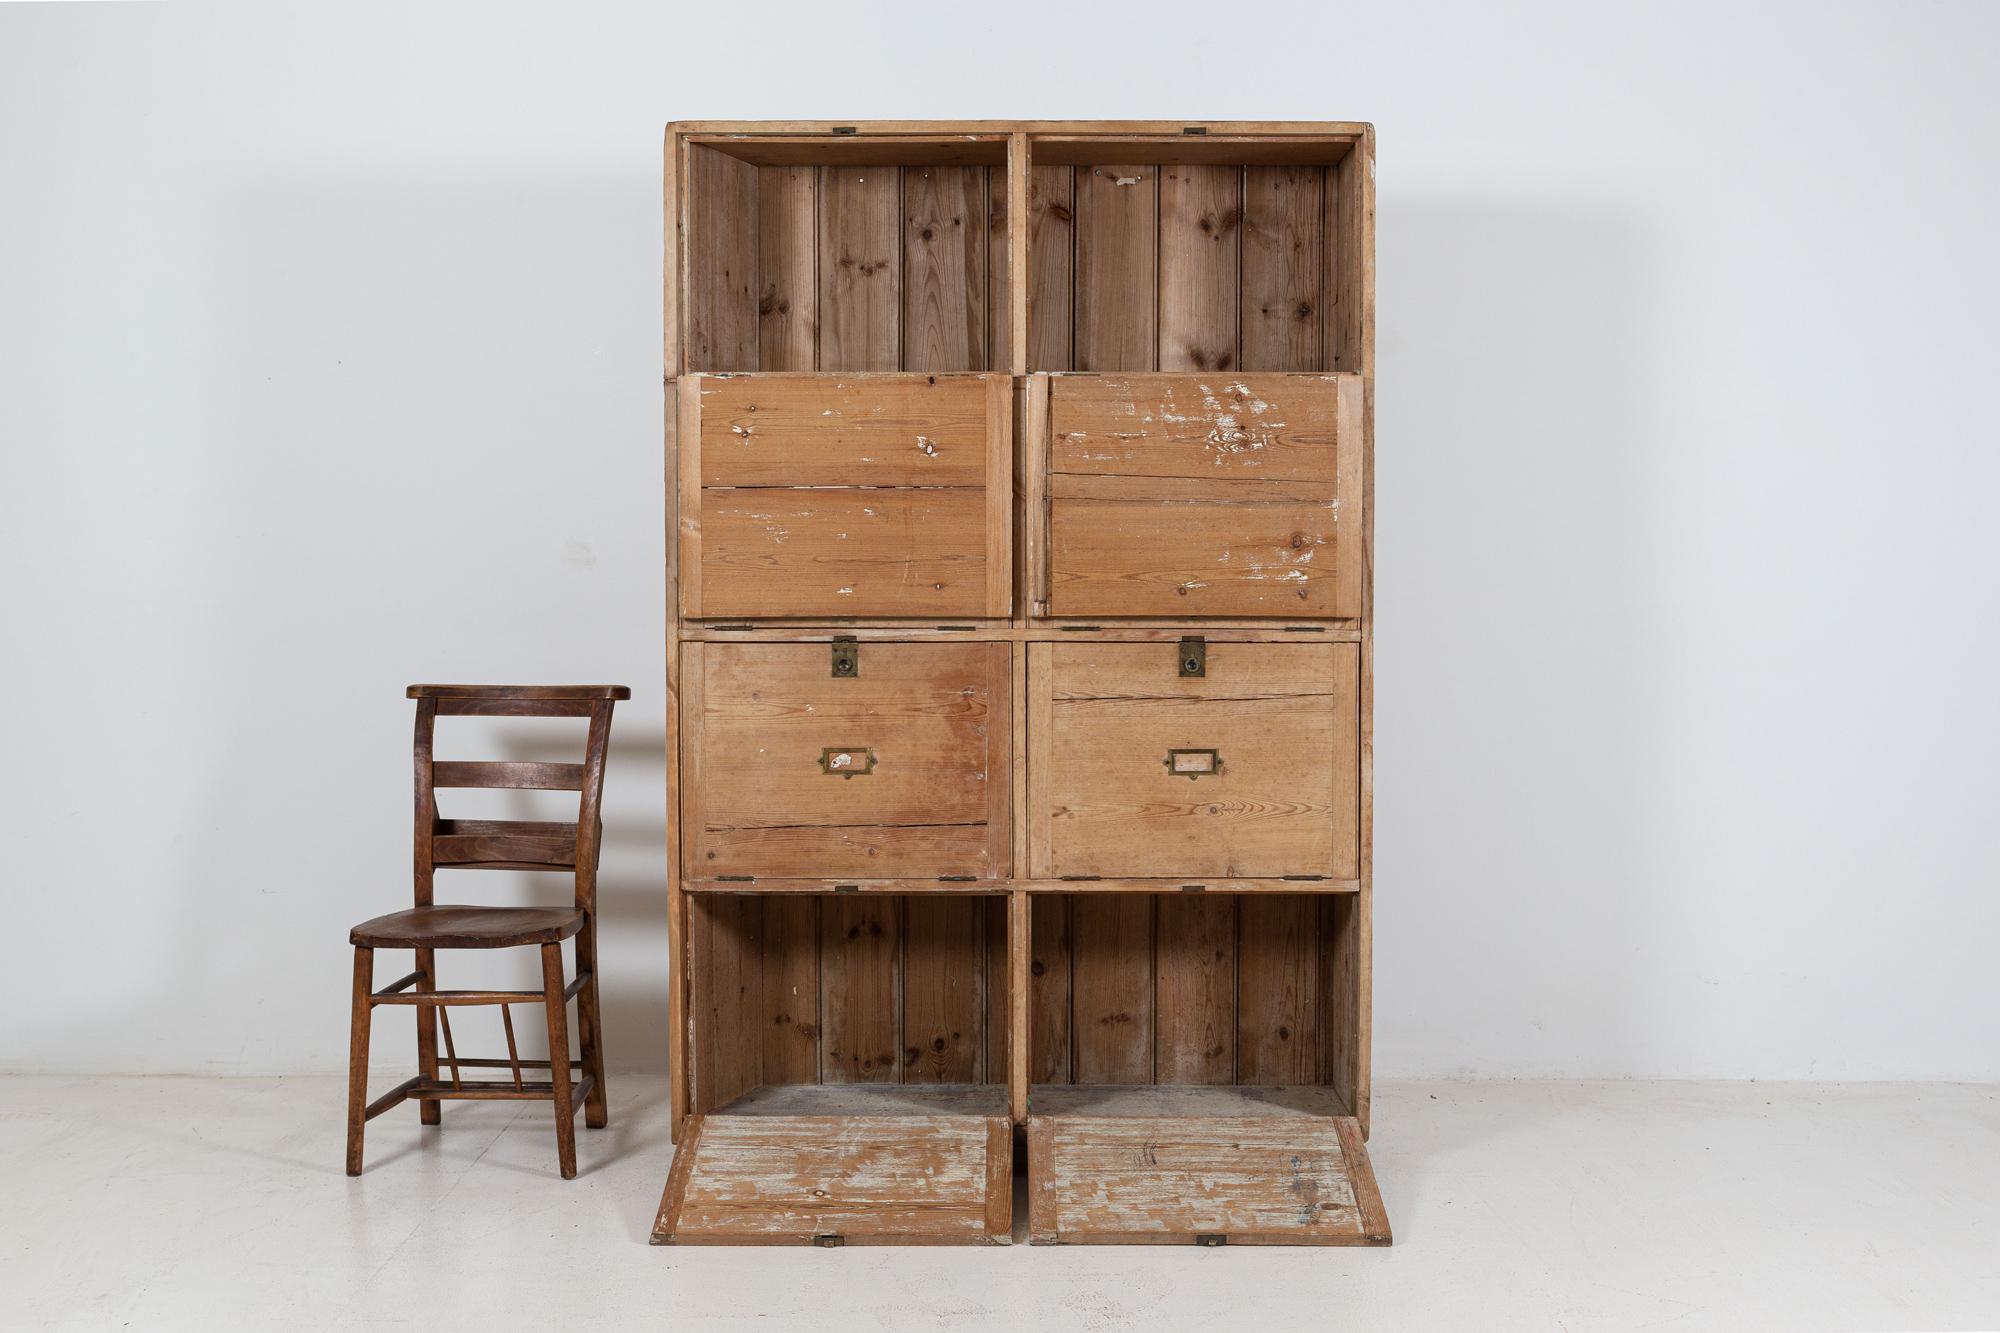 Circa 1870

19thC large English pine office cabinet

(losses)

Measures: H 176 x D 34 x W 121 cm.

 